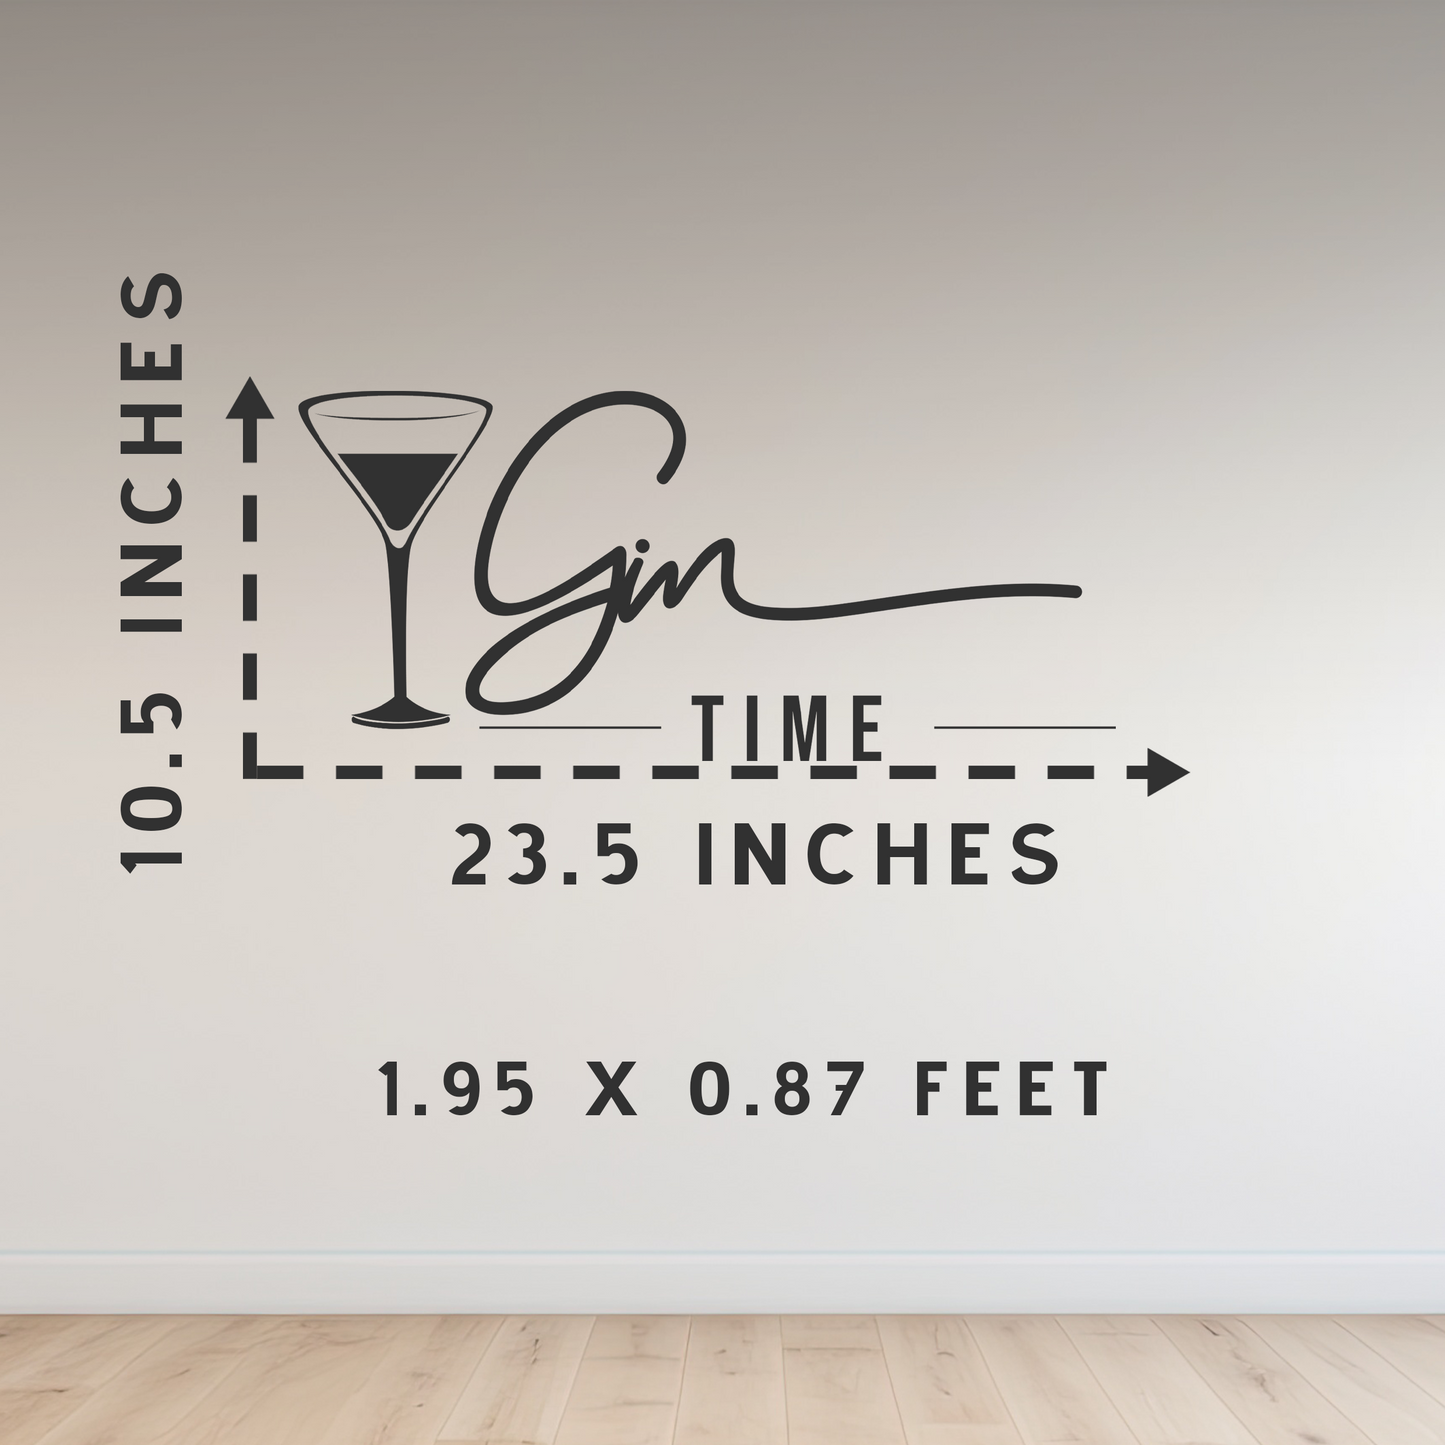 Gin Time Kitchen Wall Sticker Decal